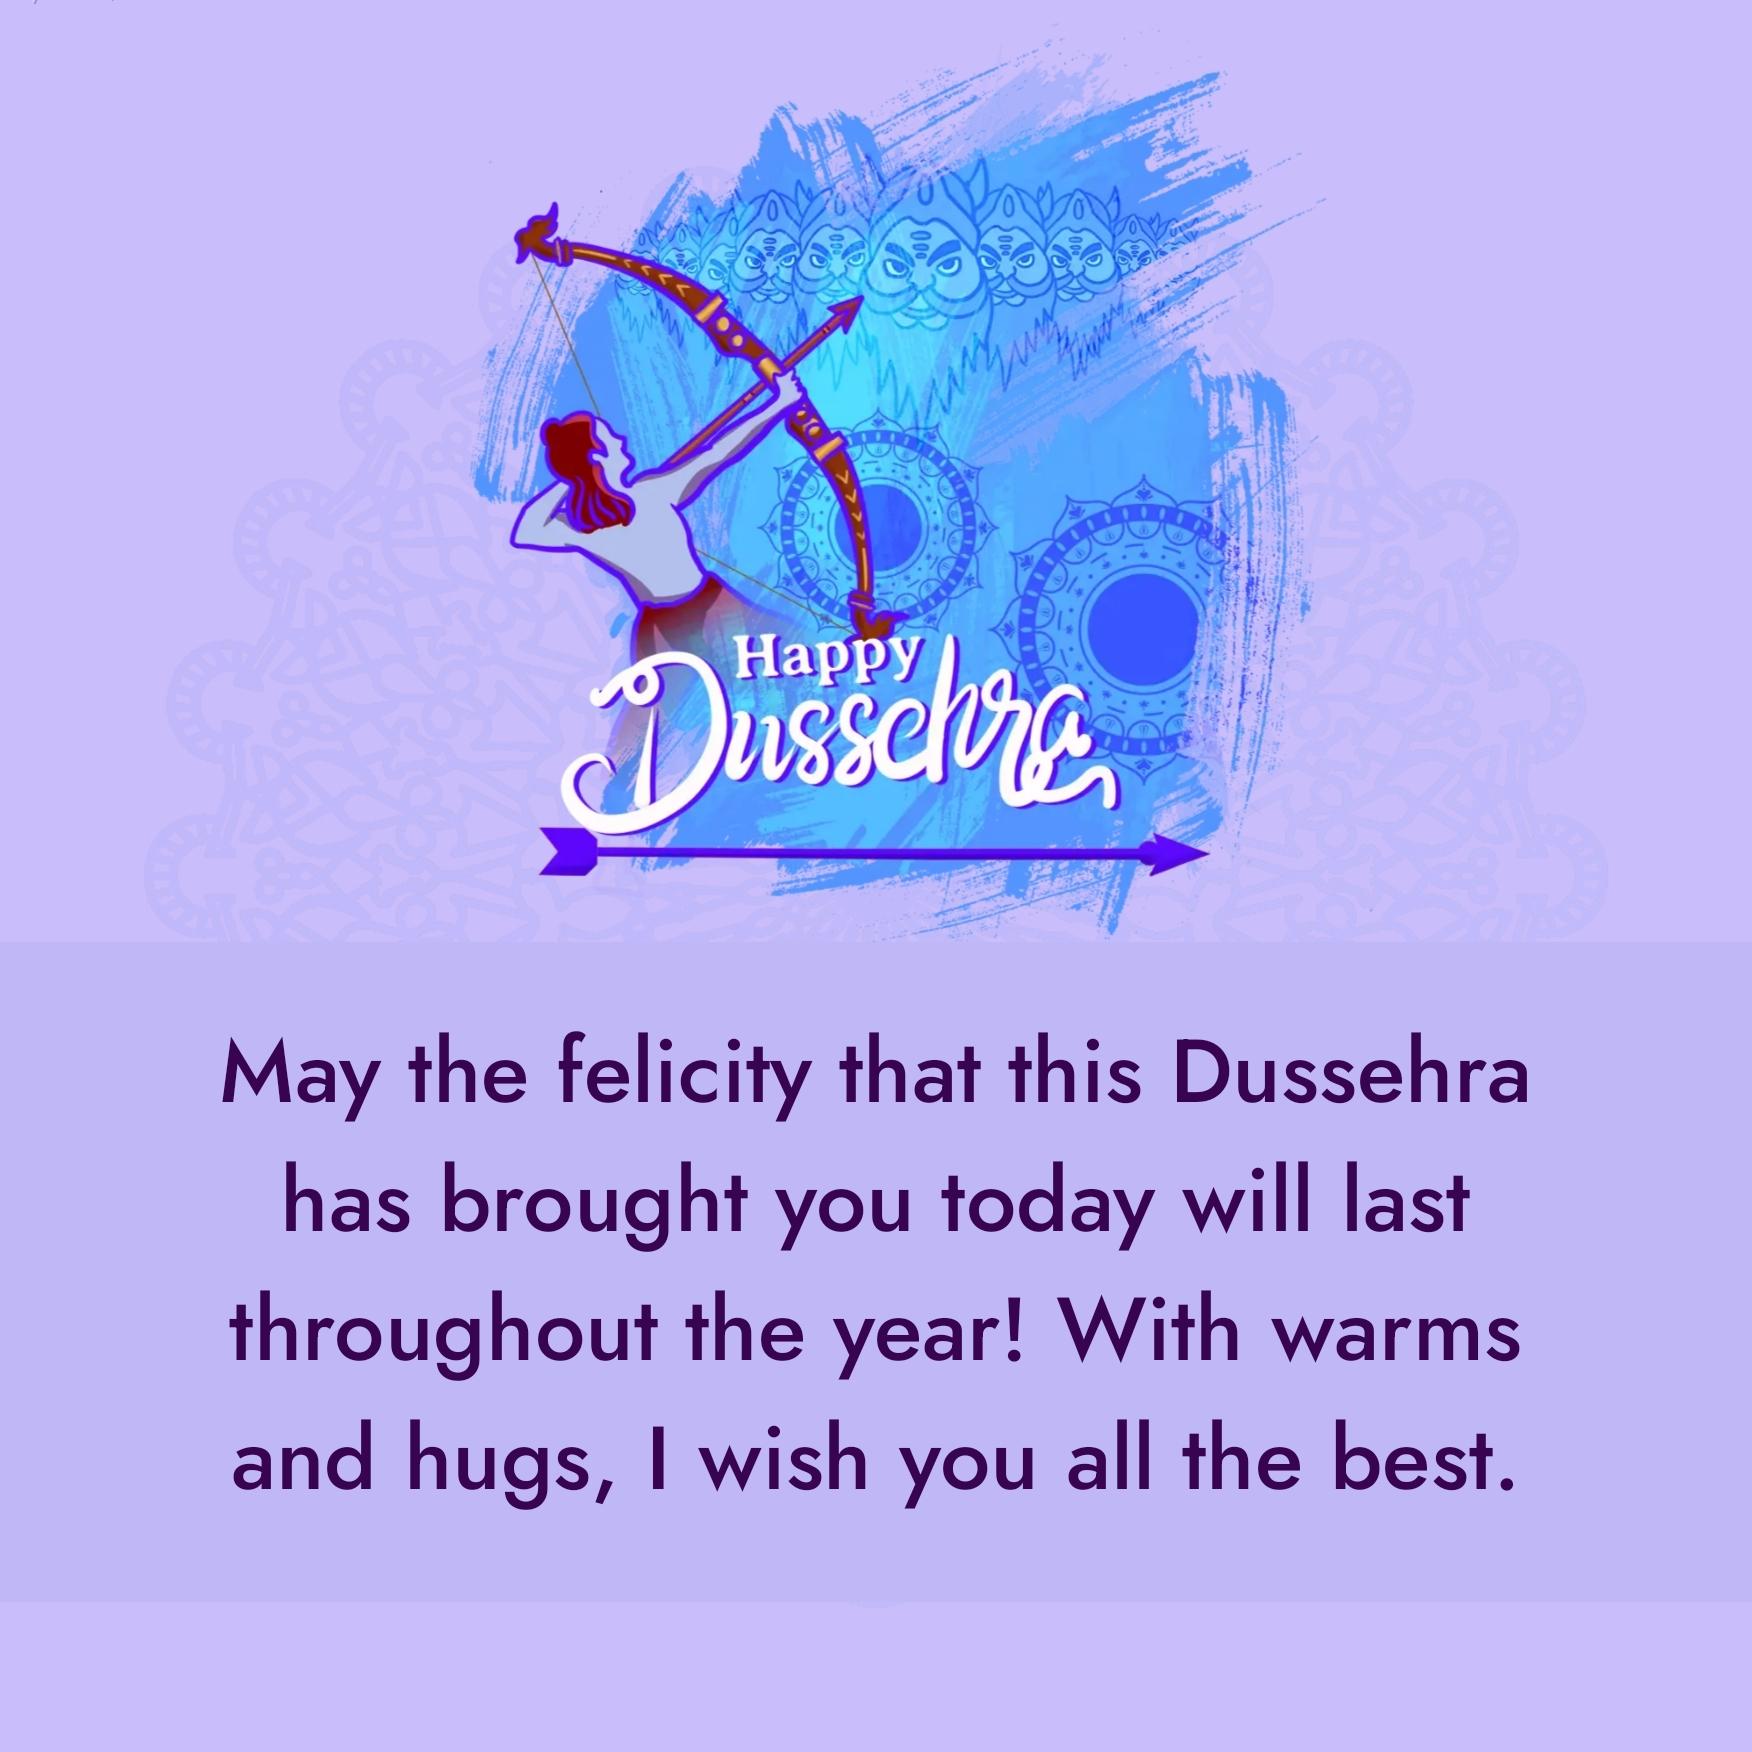 May the felicity that this Dussehra has brought you today